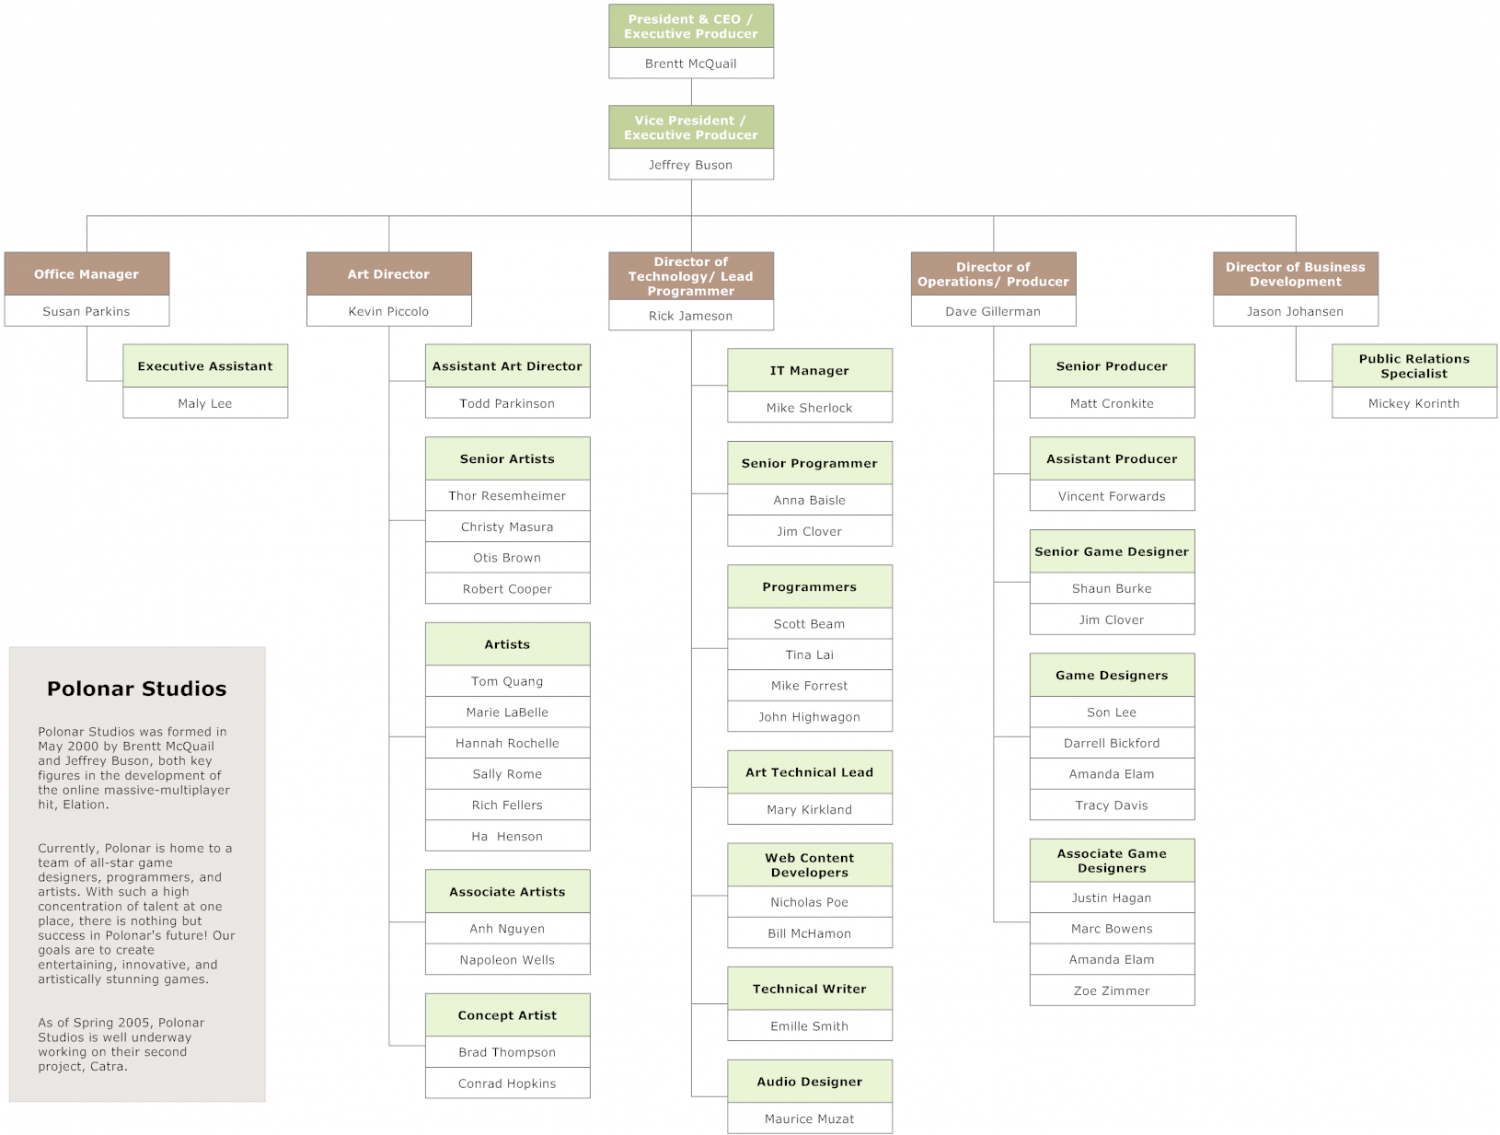  Organize Your Direct Reports Vertically on the Org Chart Infographic